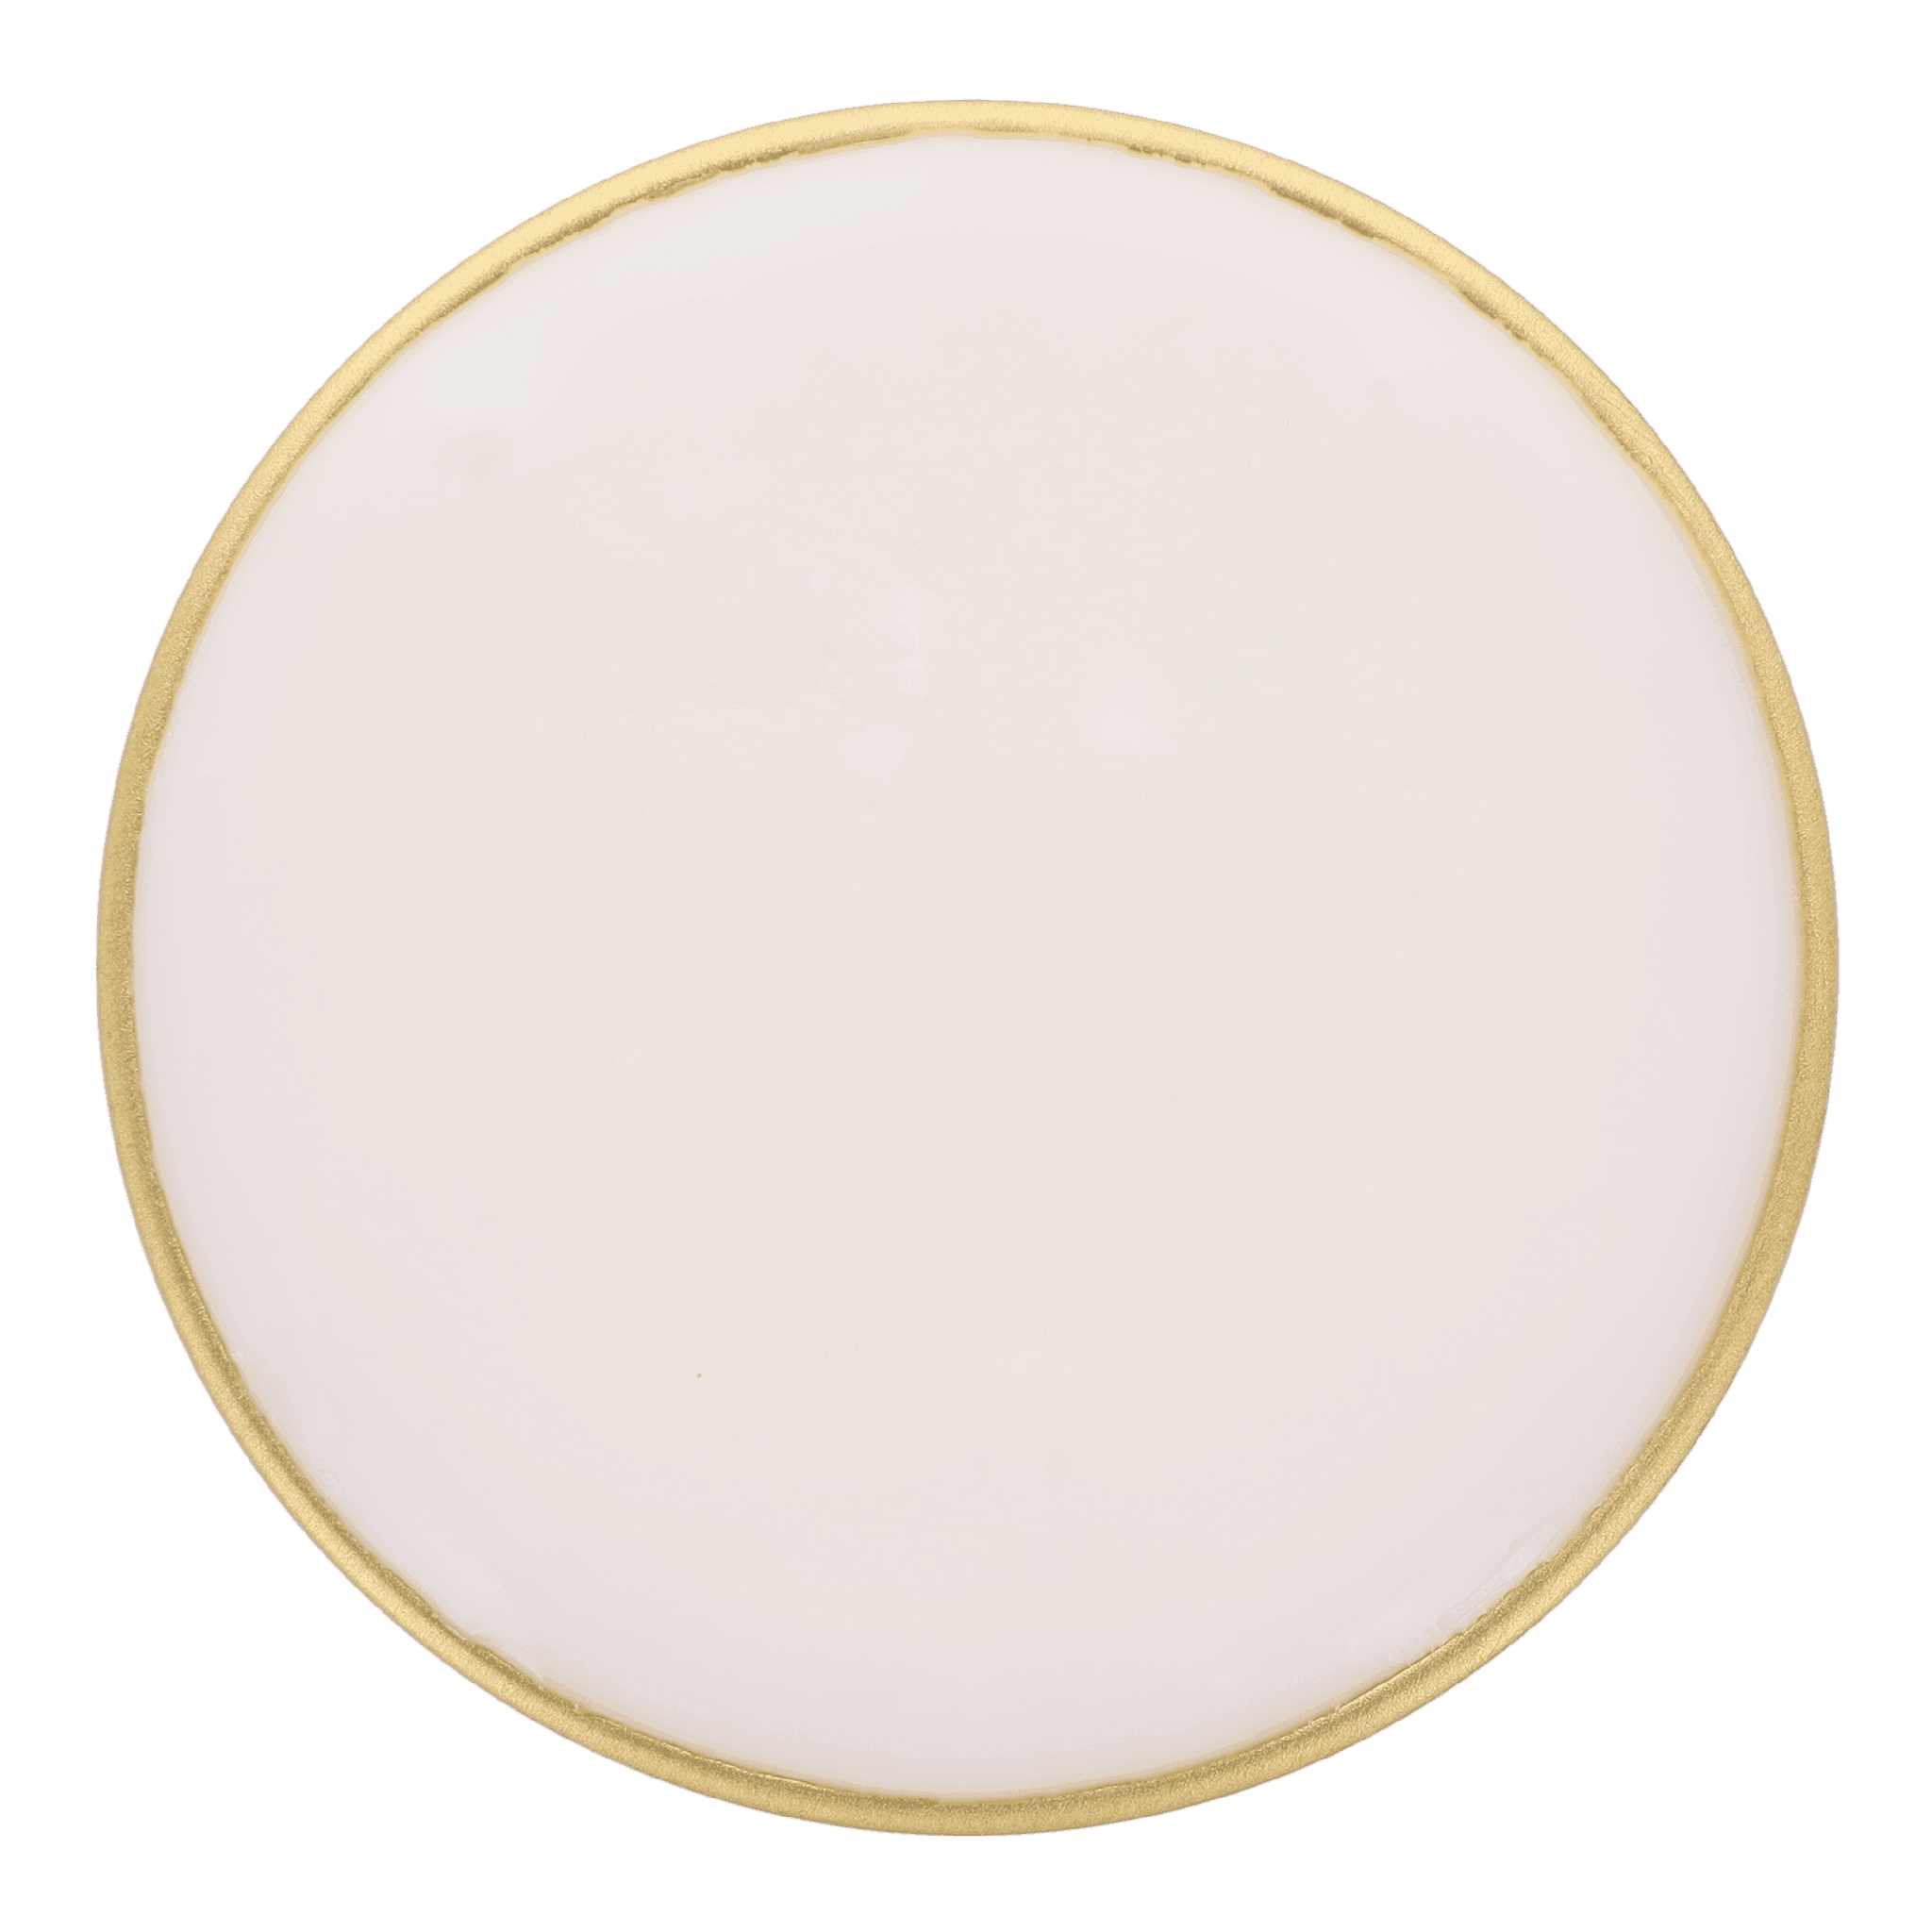 Fondant White Pastry Icing - Savory Gourmet